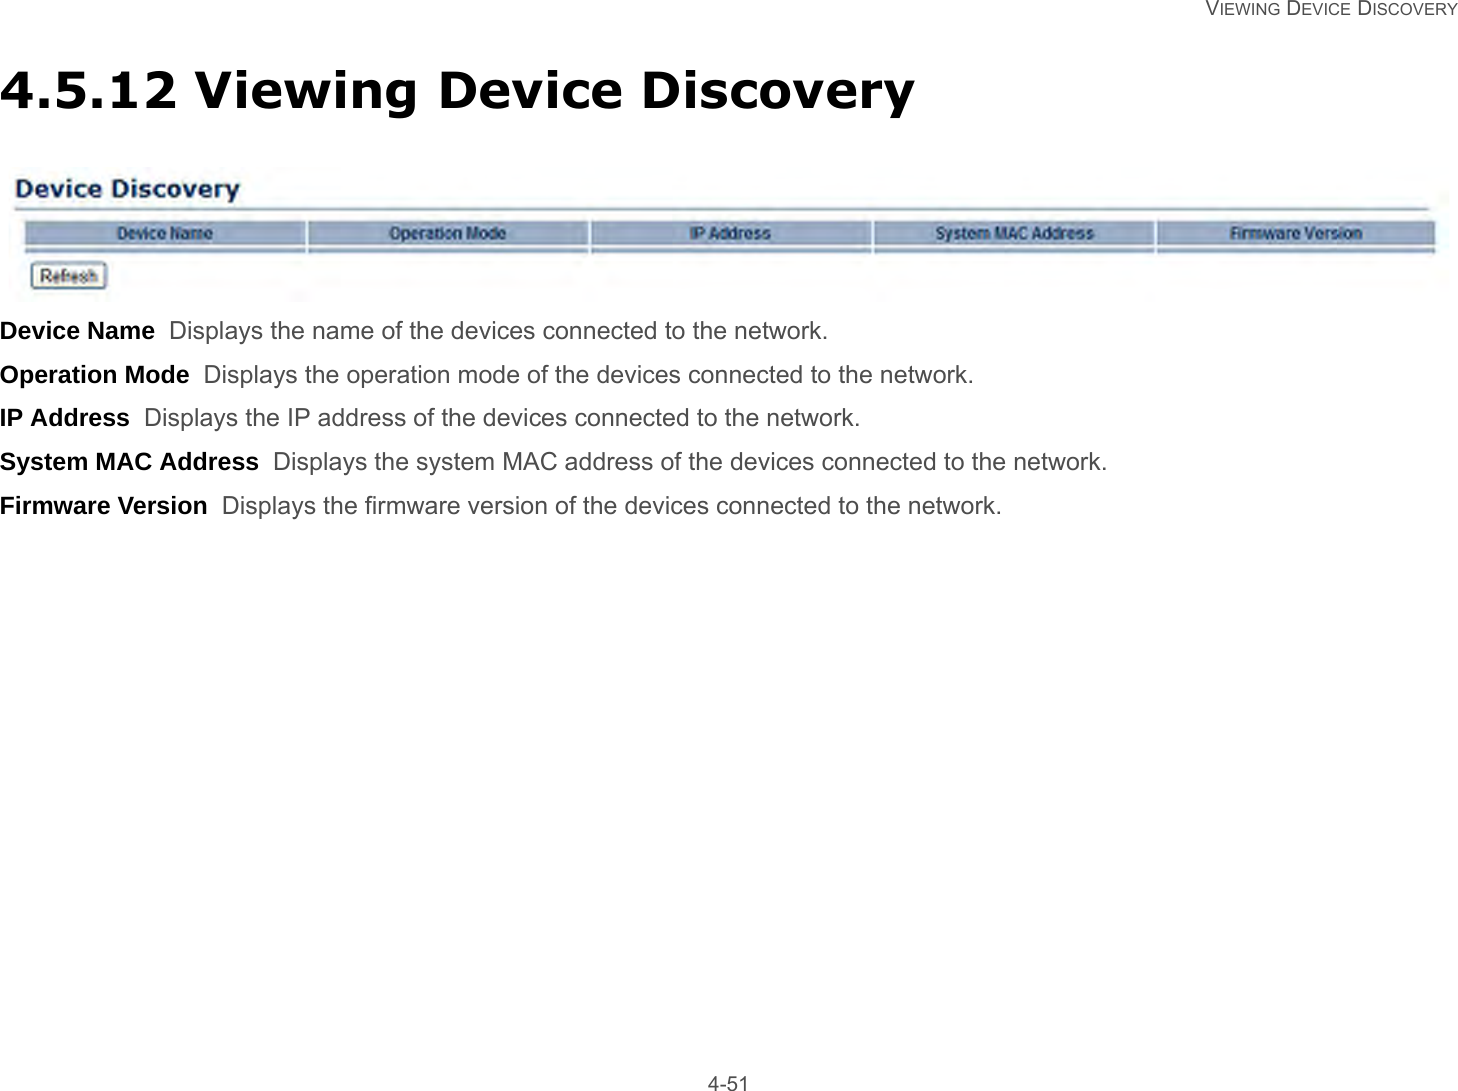   VIEWING DEVICE DISCOVERY 4-514.5.12 Viewing Device DiscoveryDevice Name  Displays the name of the devices connected to the network.Operation Mode  Displays the operation mode of the devices connected to the network.IP Address  Displays the IP address of the devices connected to the network.System MAC Address  Displays the system MAC address of the devices connected to the network.Firmware Version  Displays the firmware version of the devices connected to the network.